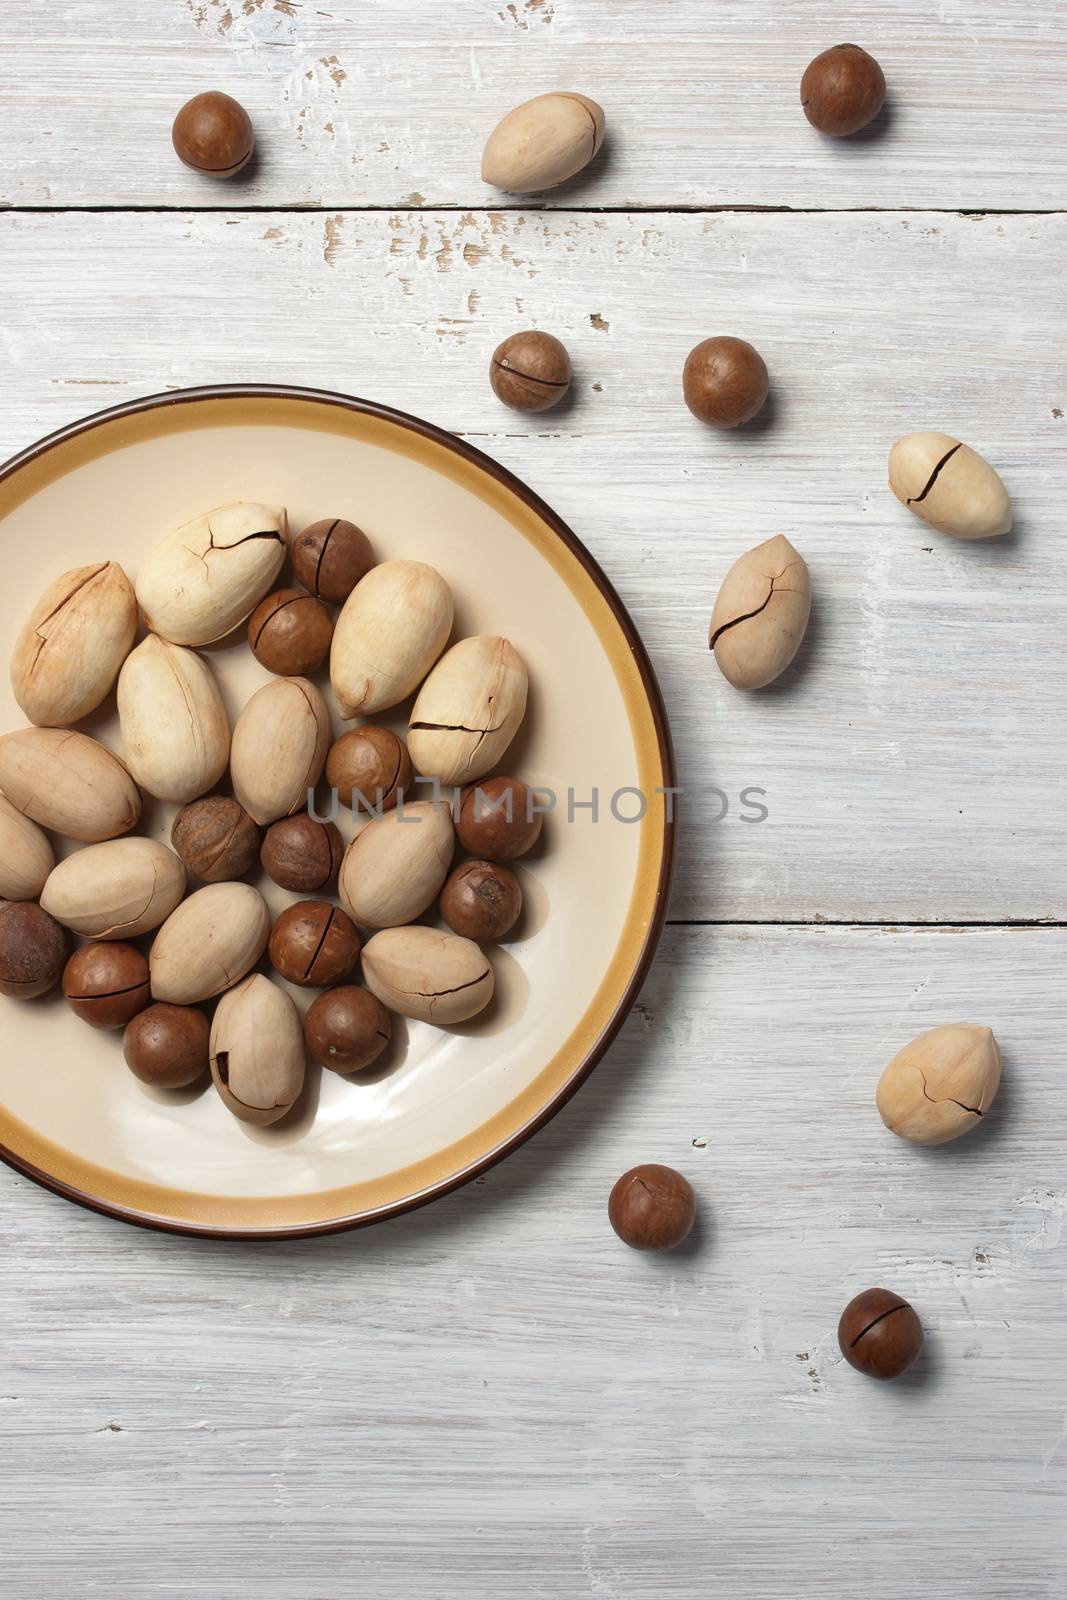 Pecan and macadamia nuts on the white background by Deniskarpenkov